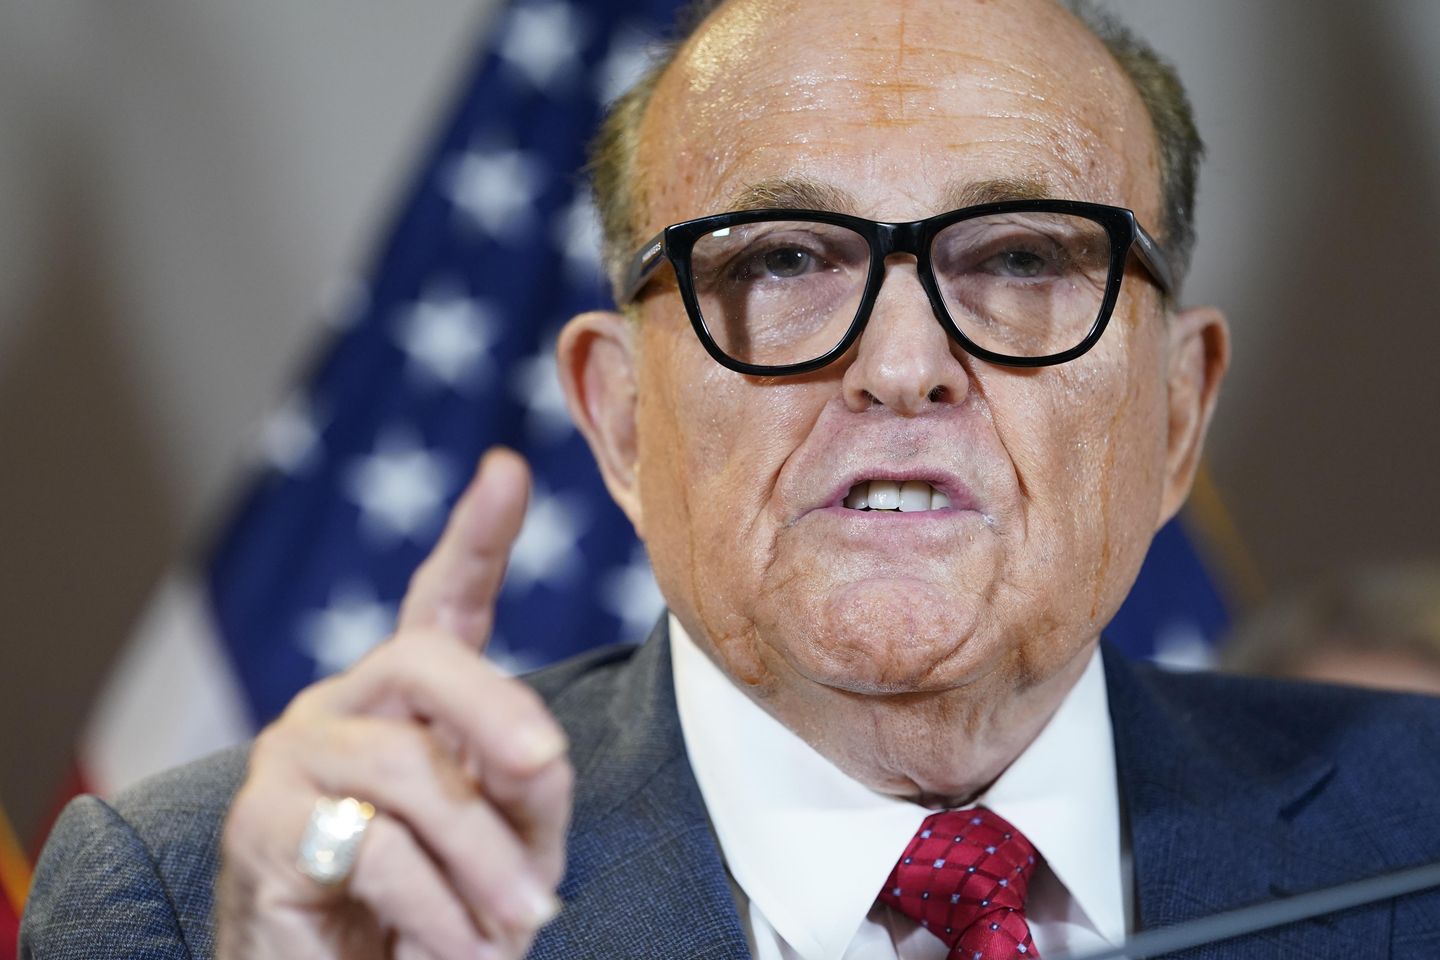 Woman sues Rudy Giuliani for sexual abuse, claims he was selling pardons for $2 million